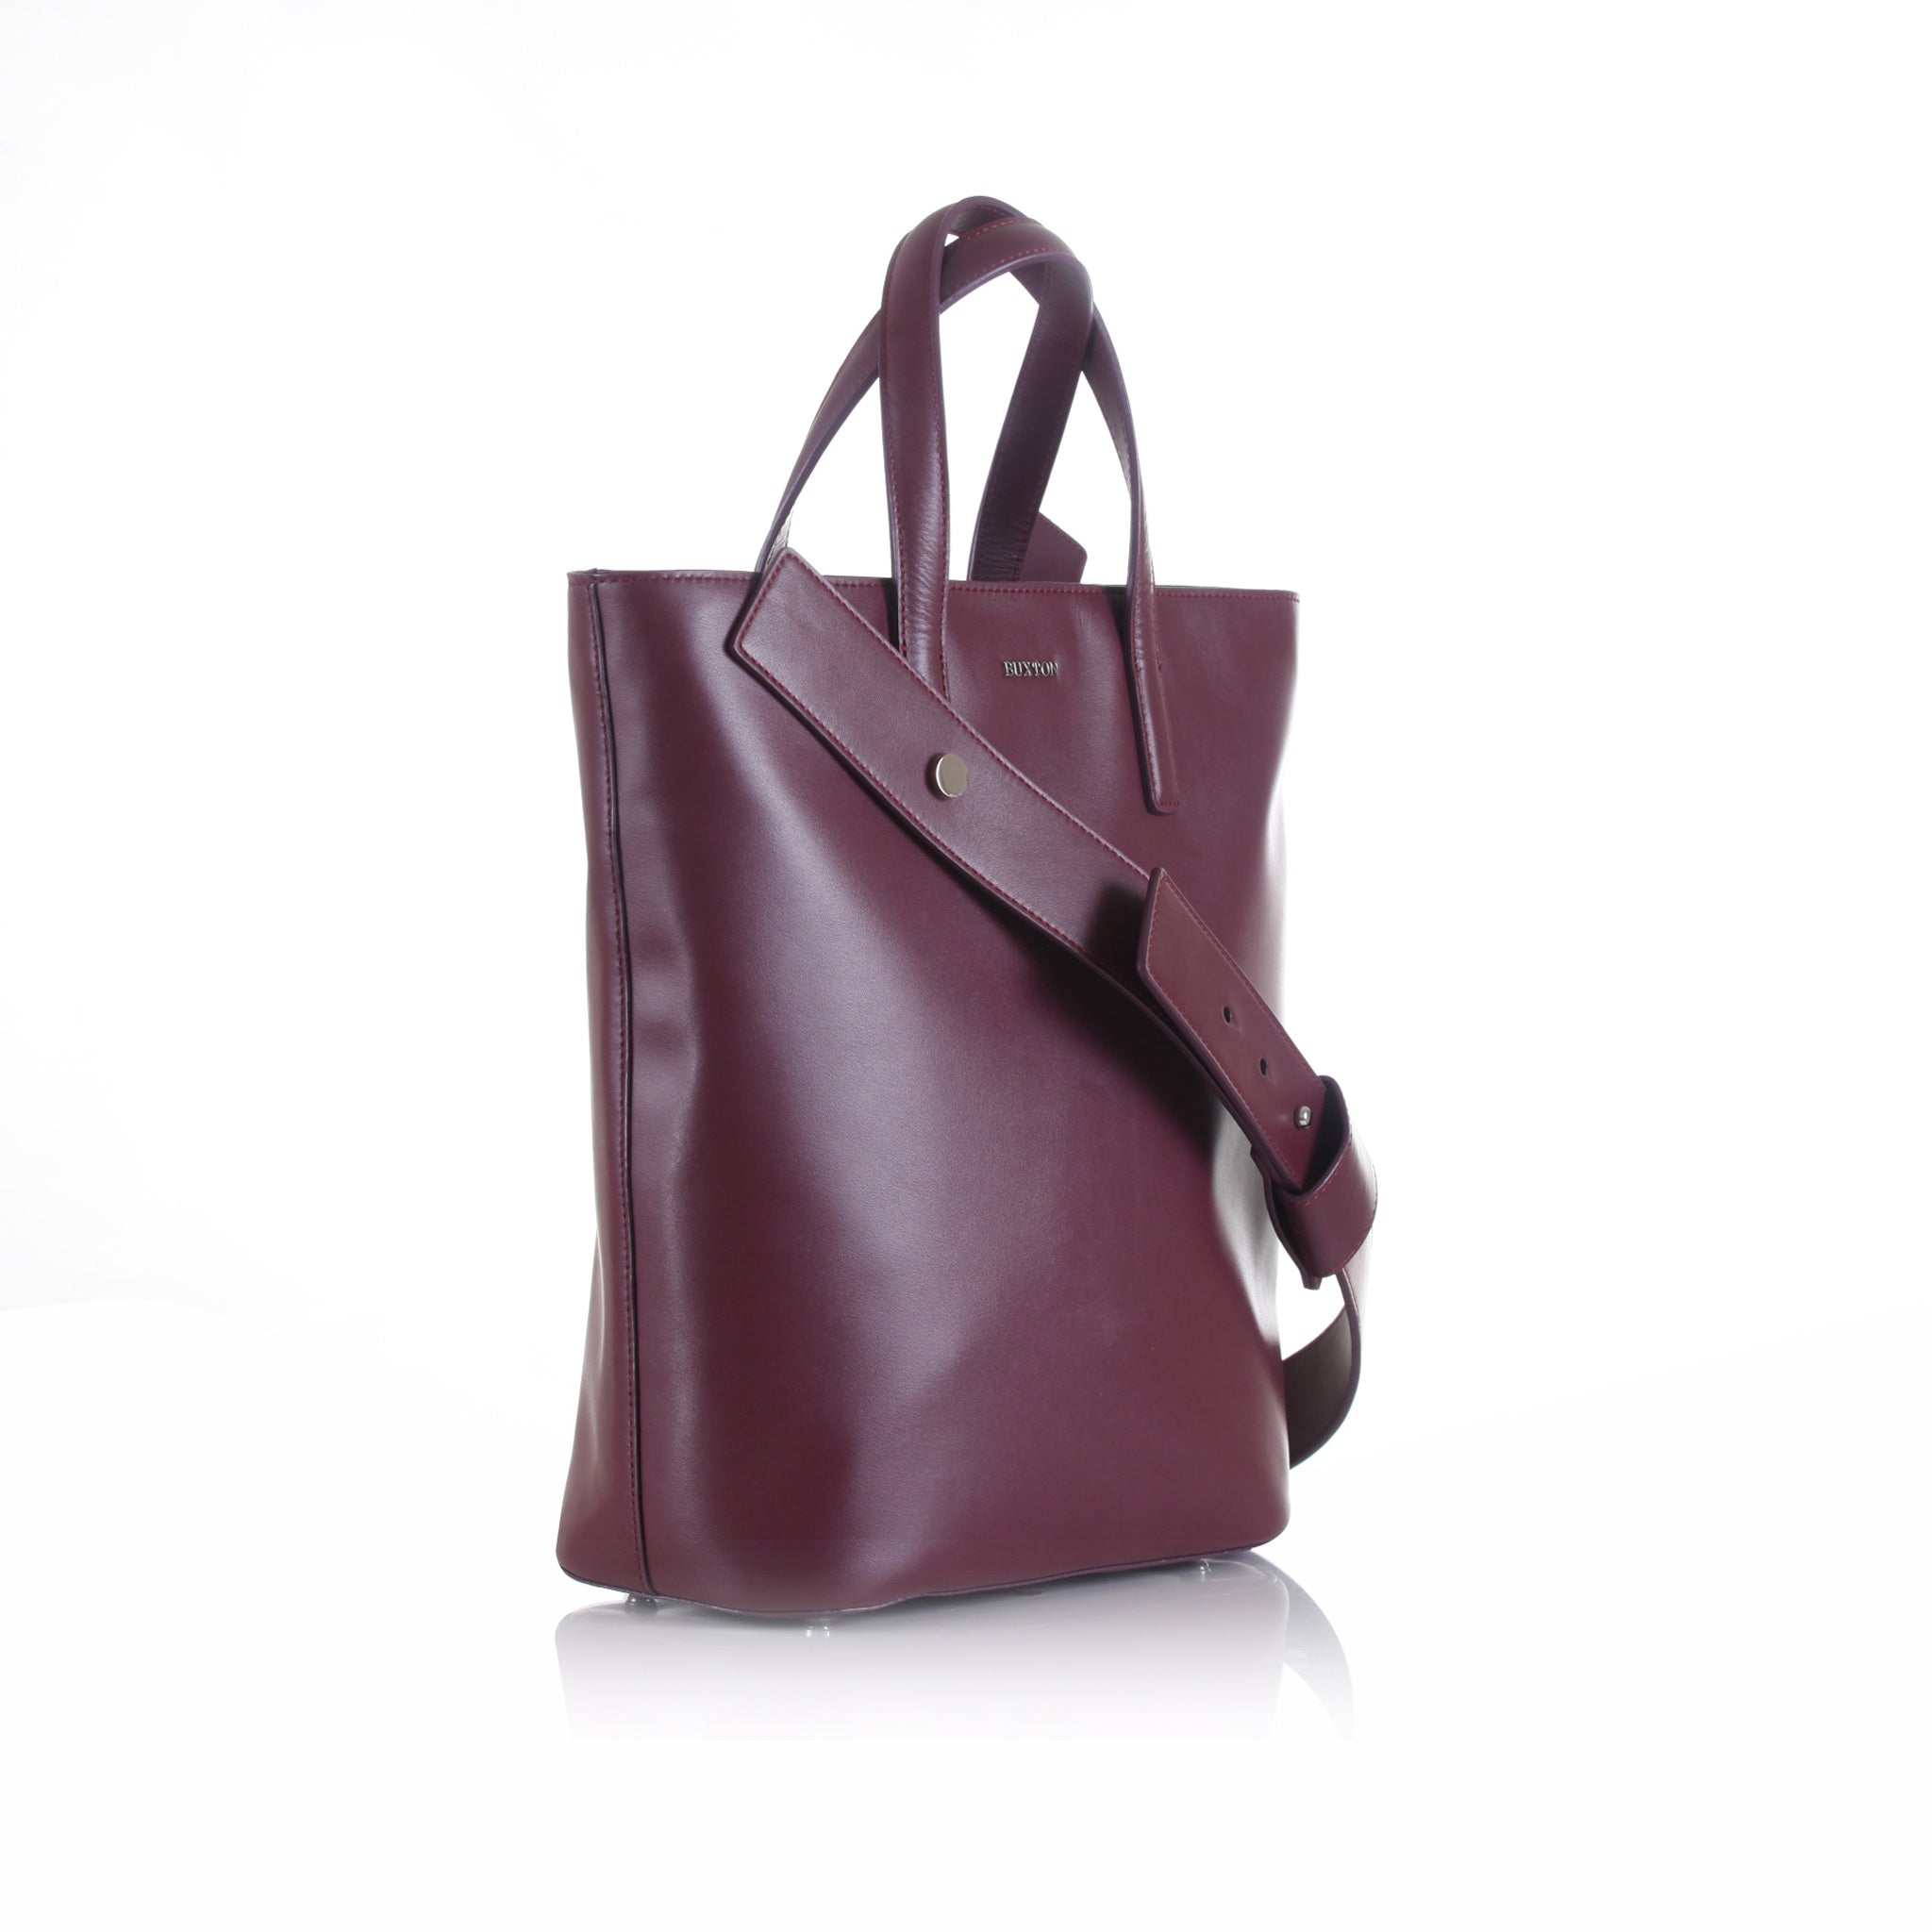 Glamorous Tote Bag with Strap